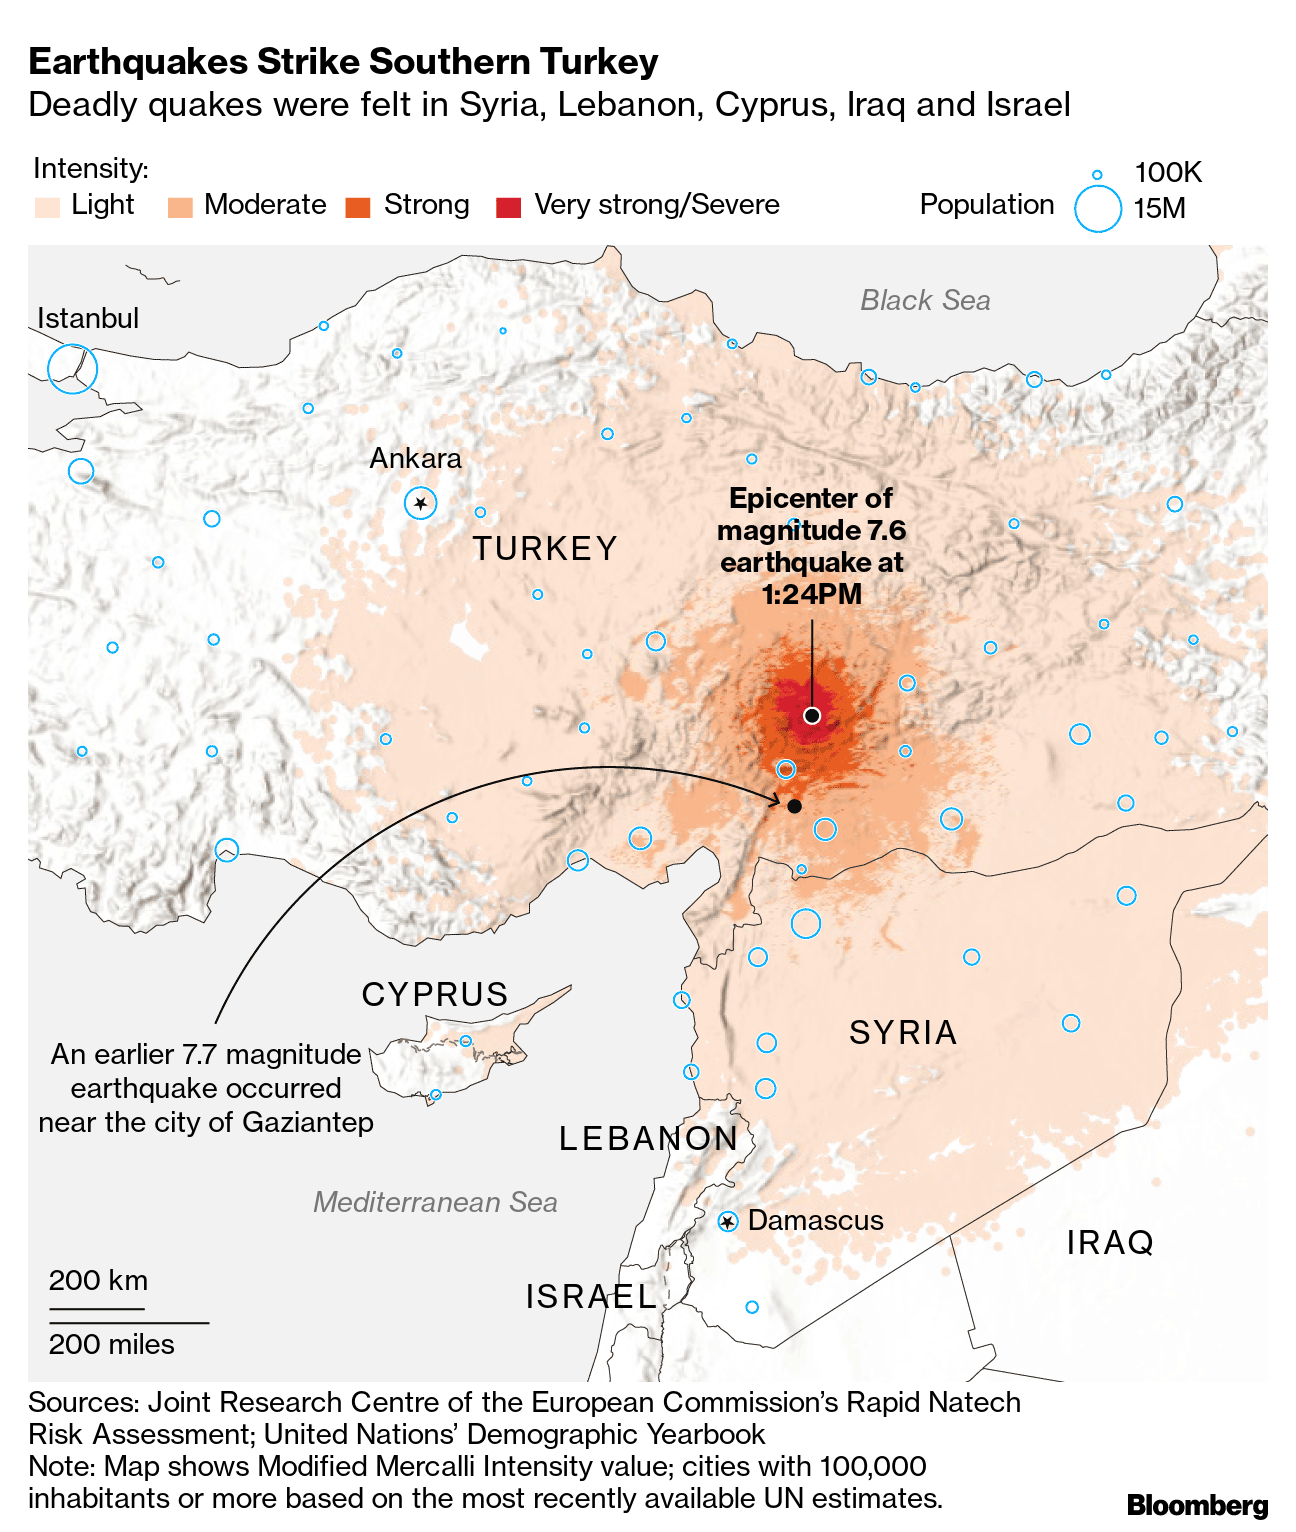 Turkey, Syria Earthquake: Death Toll, Injuries, Relief Efforts - Bloomberg